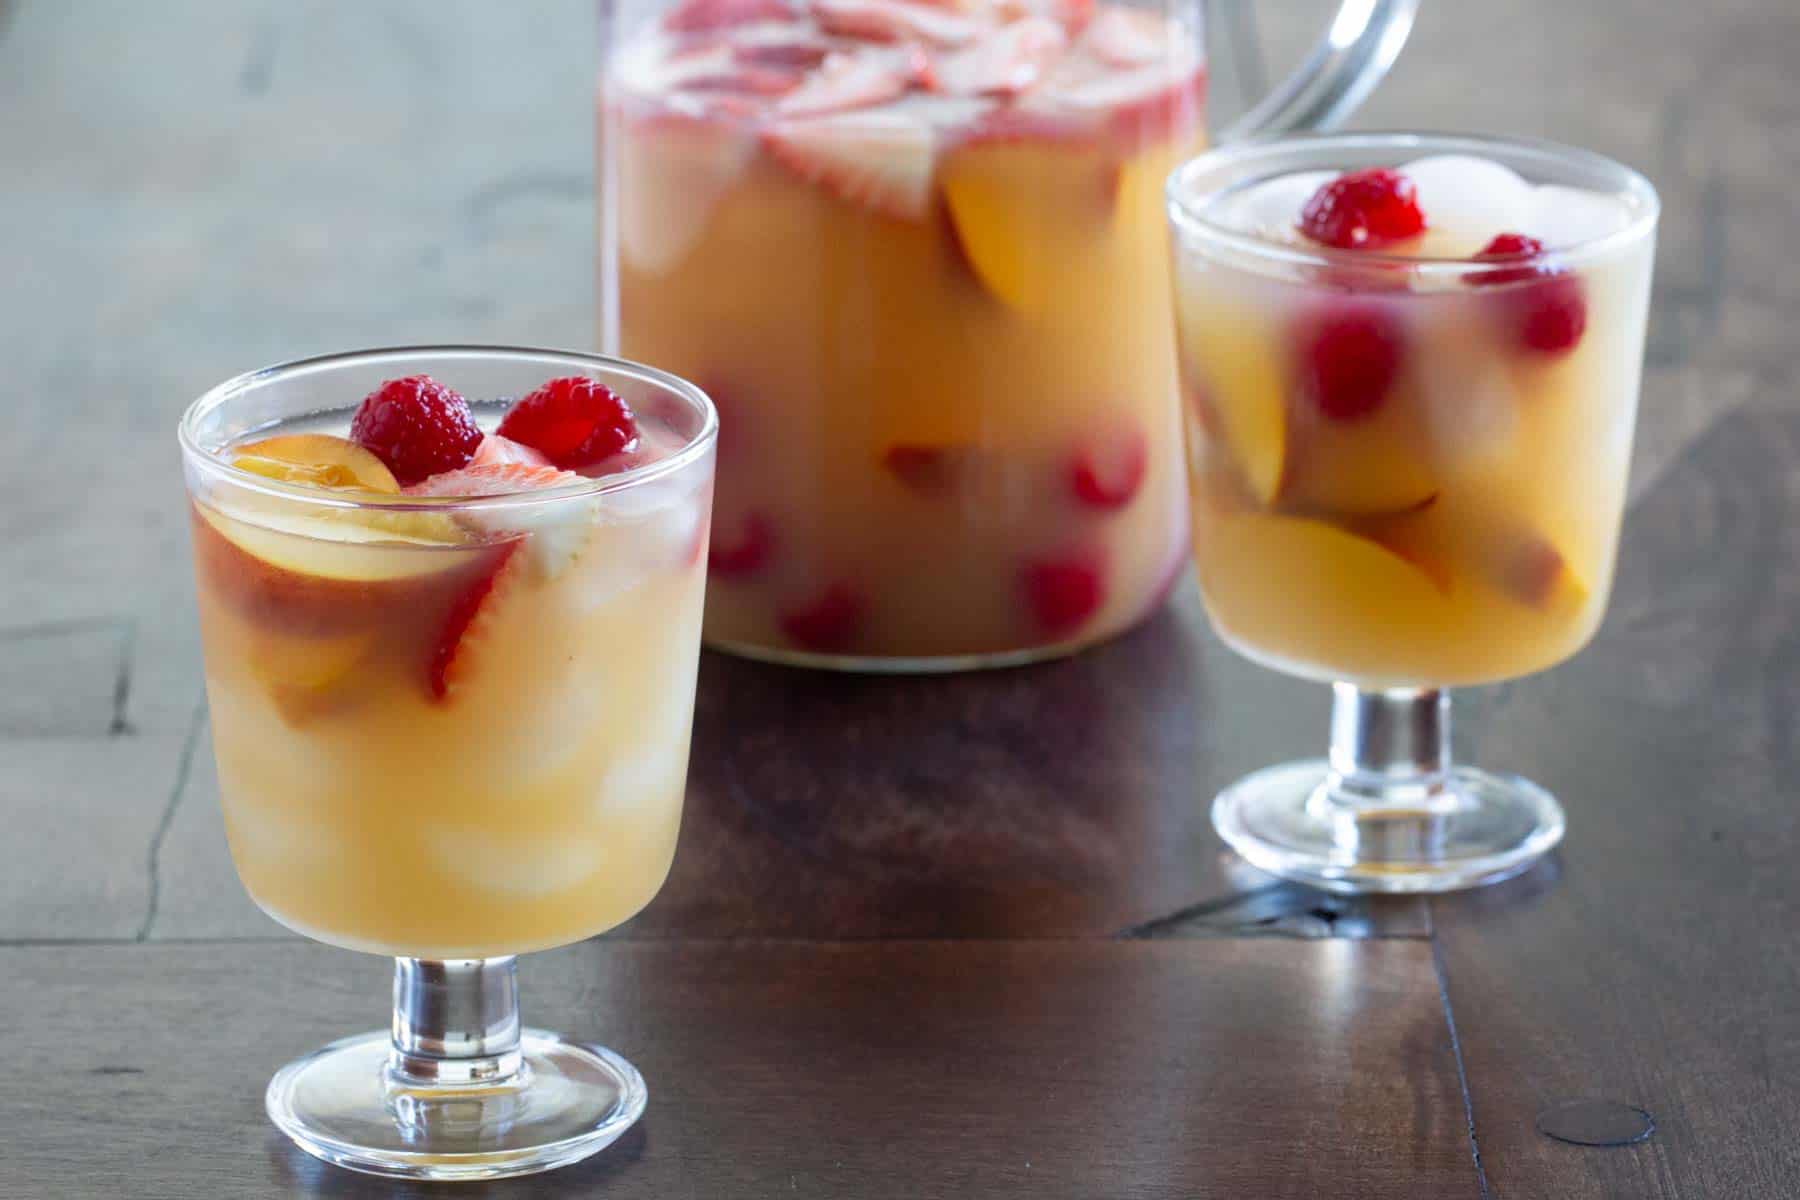 Two glasses and a pitcher of fruit sangria on a wooden table, containing sliced strawberries, peaches, and cherries.